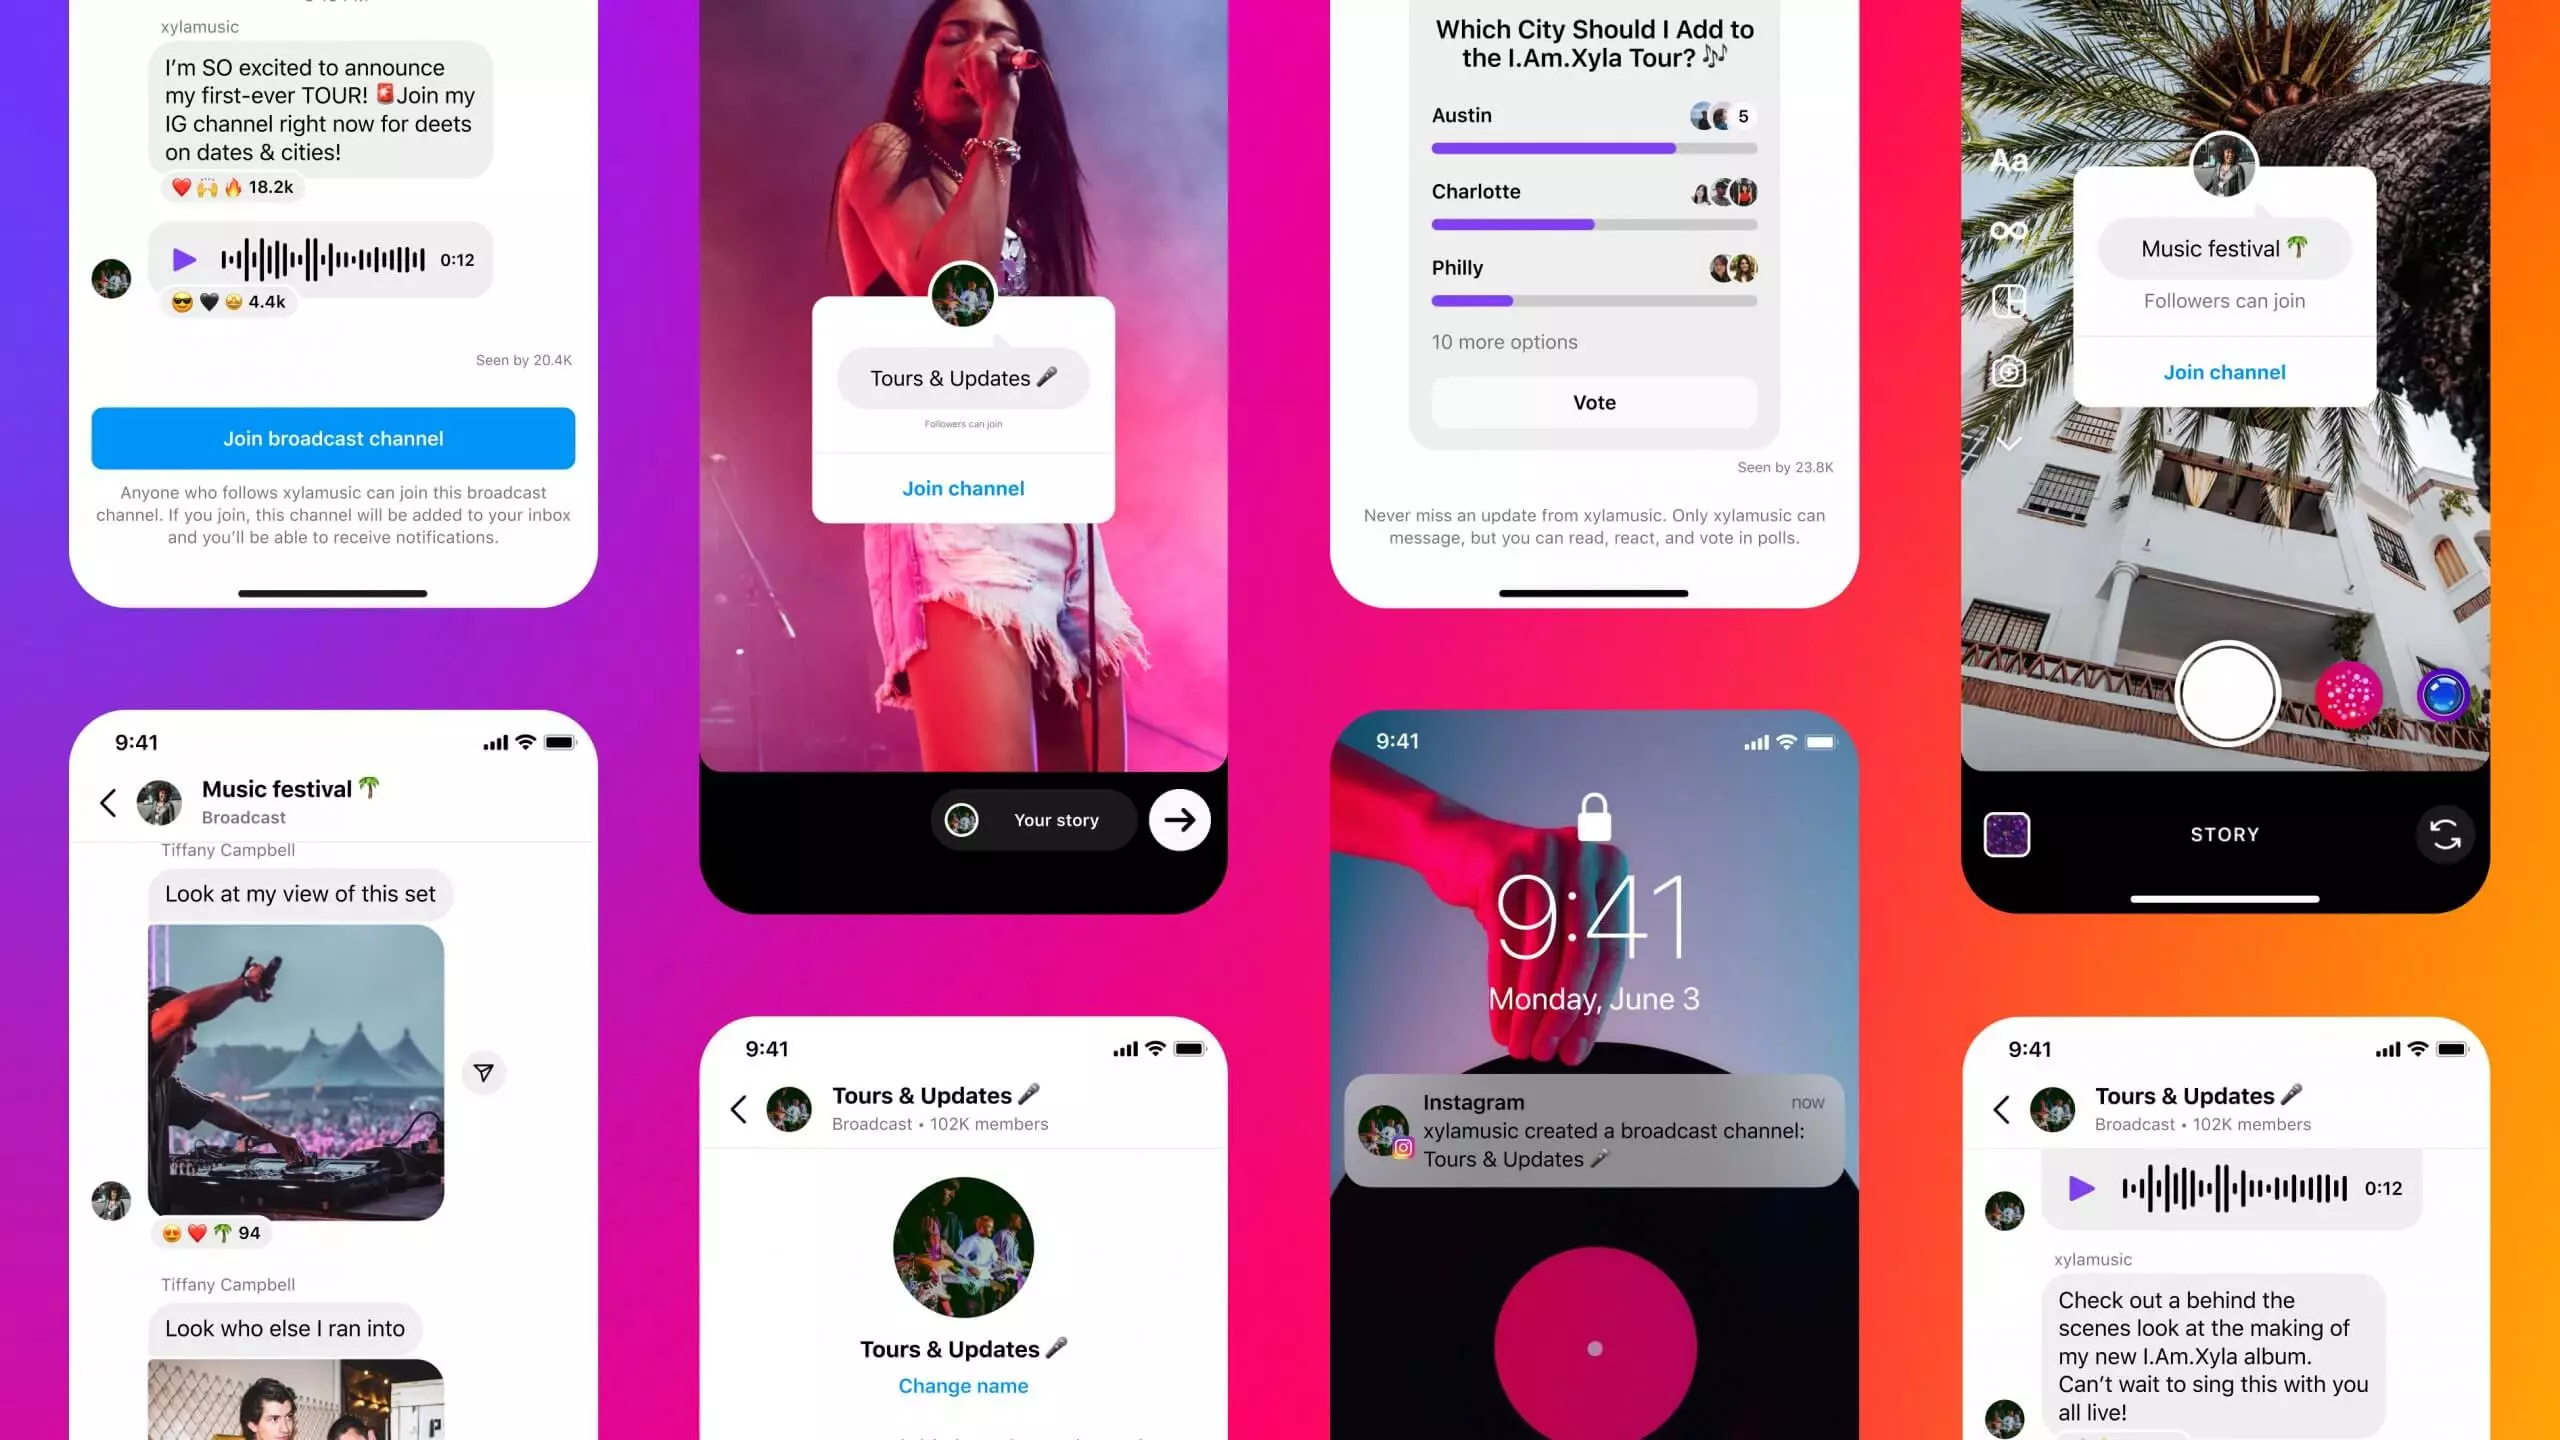 Instagram's feature for broadcast channels, showing examples of how users can engage with followers through various content formats.